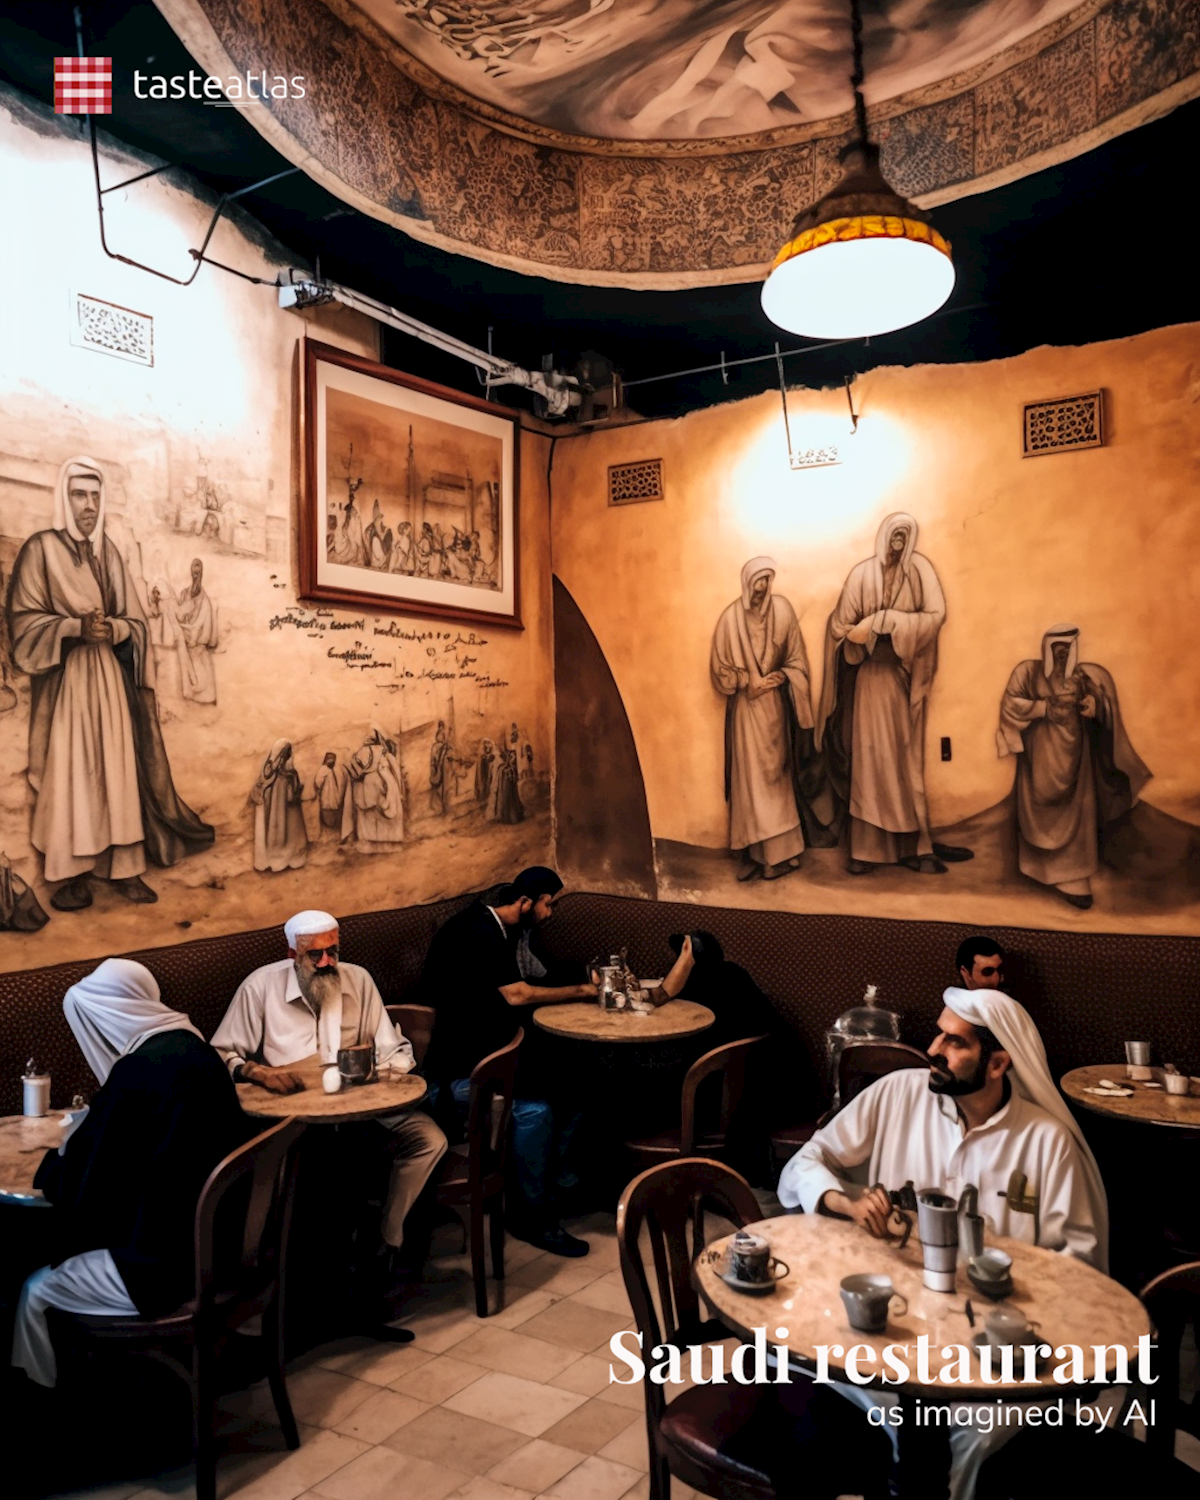 Prompt: Imagine locals eating in a traditional Saudi restaurant